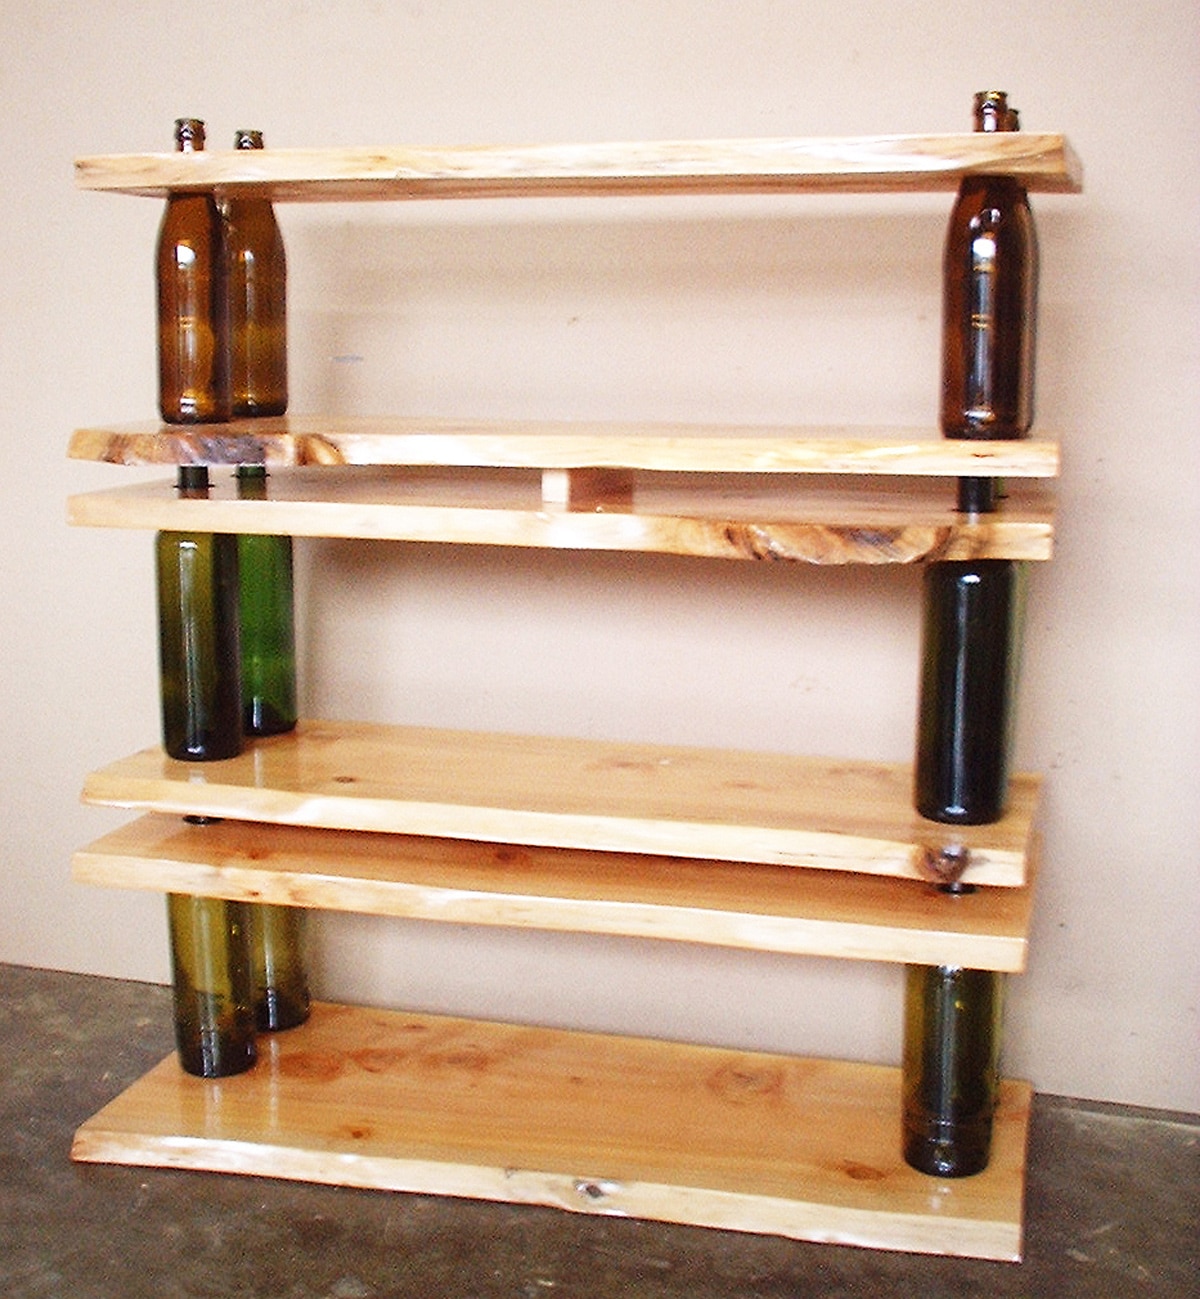 shelving and tables using glass bottles